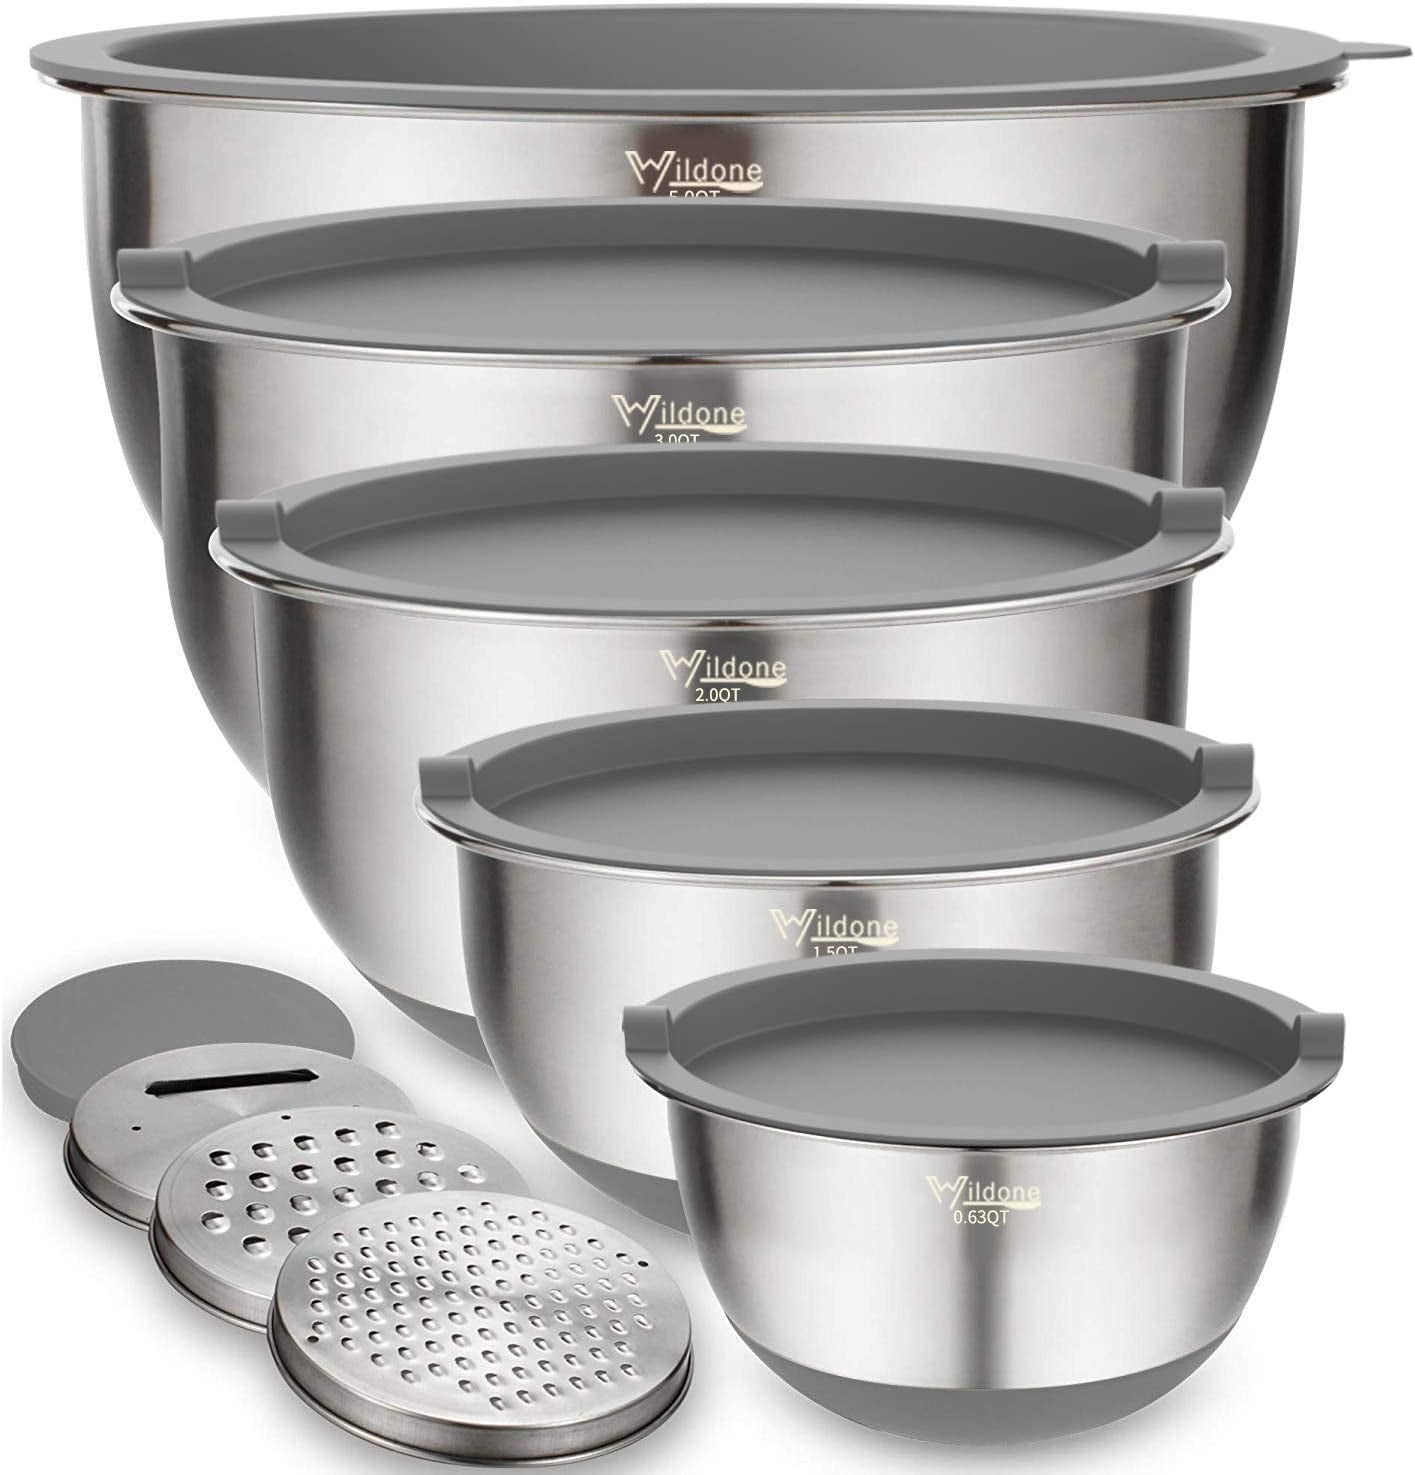 Mixing Bowls Set of 5, Stainless Steel Nesting Bowls with Khaki Lids, 3 Grater Attachments, Measurement Marks & Non-Slip Bottoms, Size 5, 3, 2, 1.5, 0.63 QT, Great for Mixing & Serving